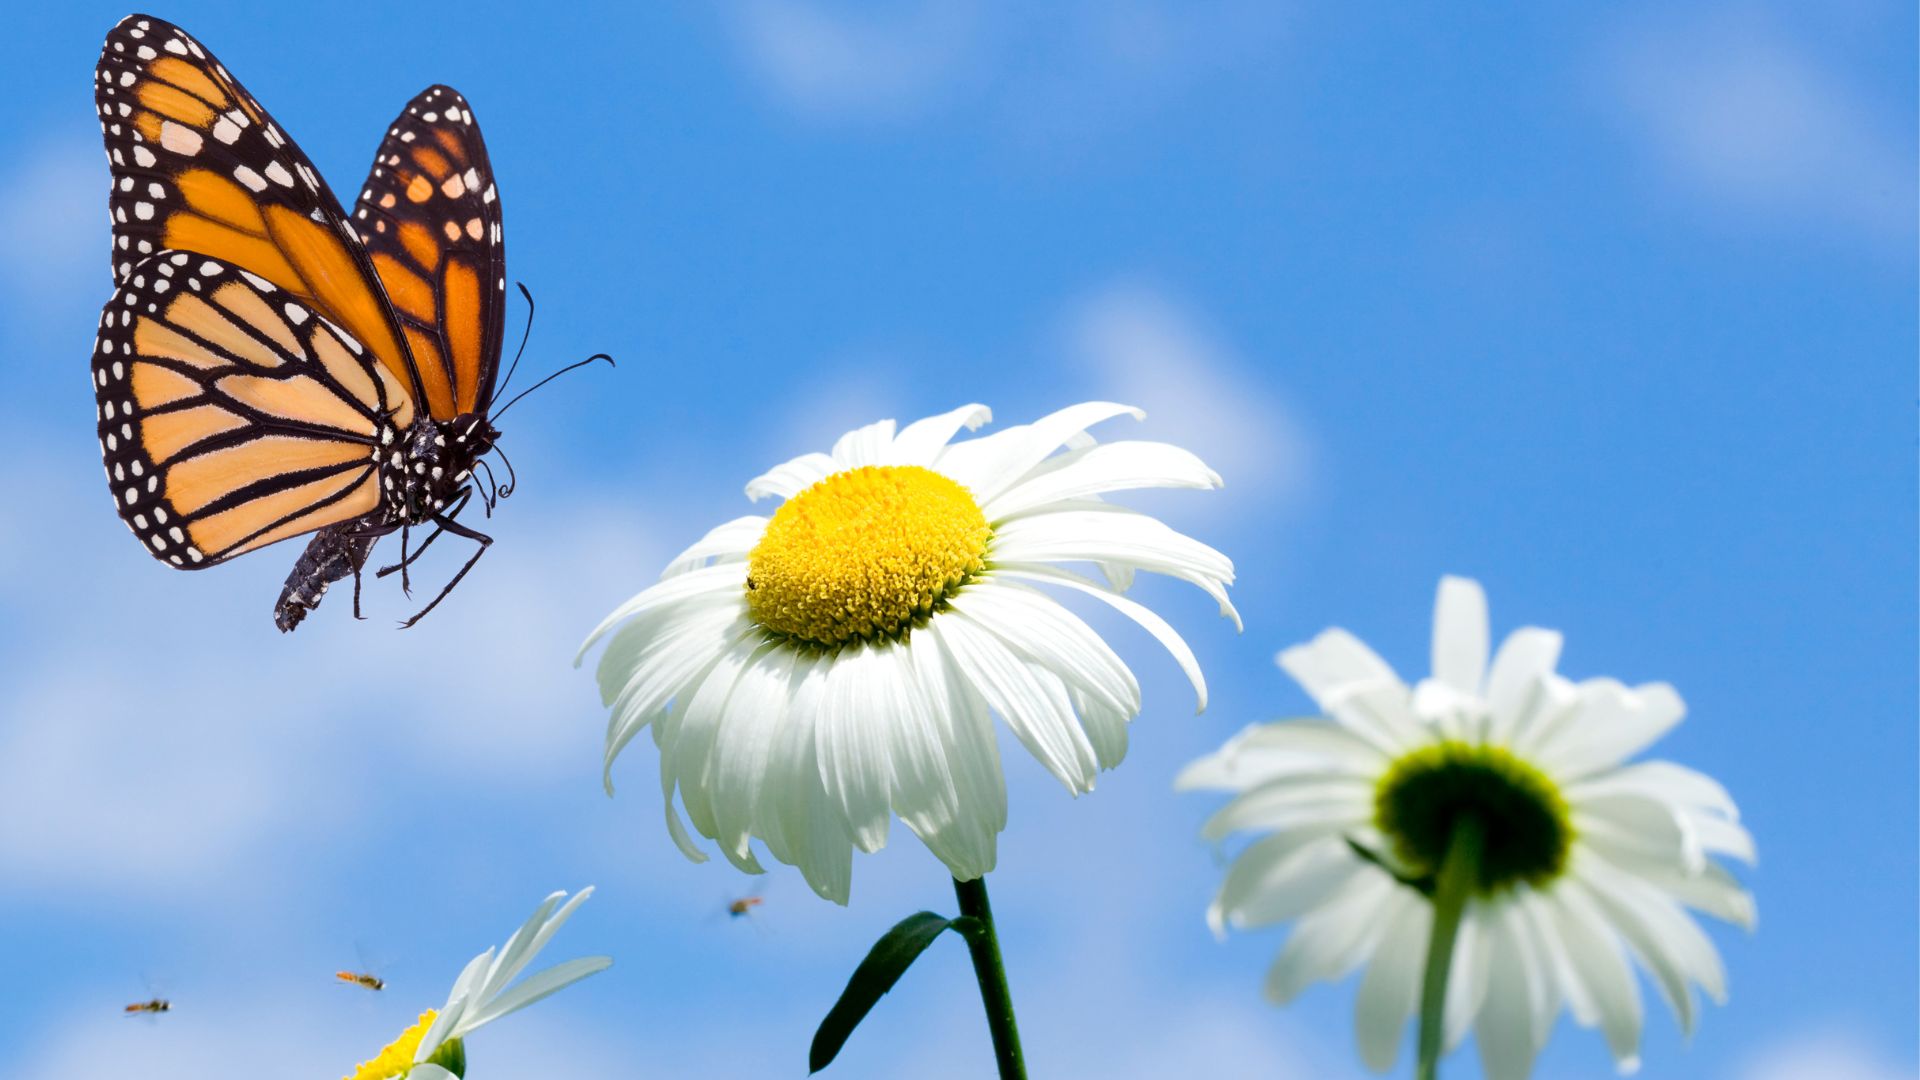 Photo of a butterfly and daisy flowers.